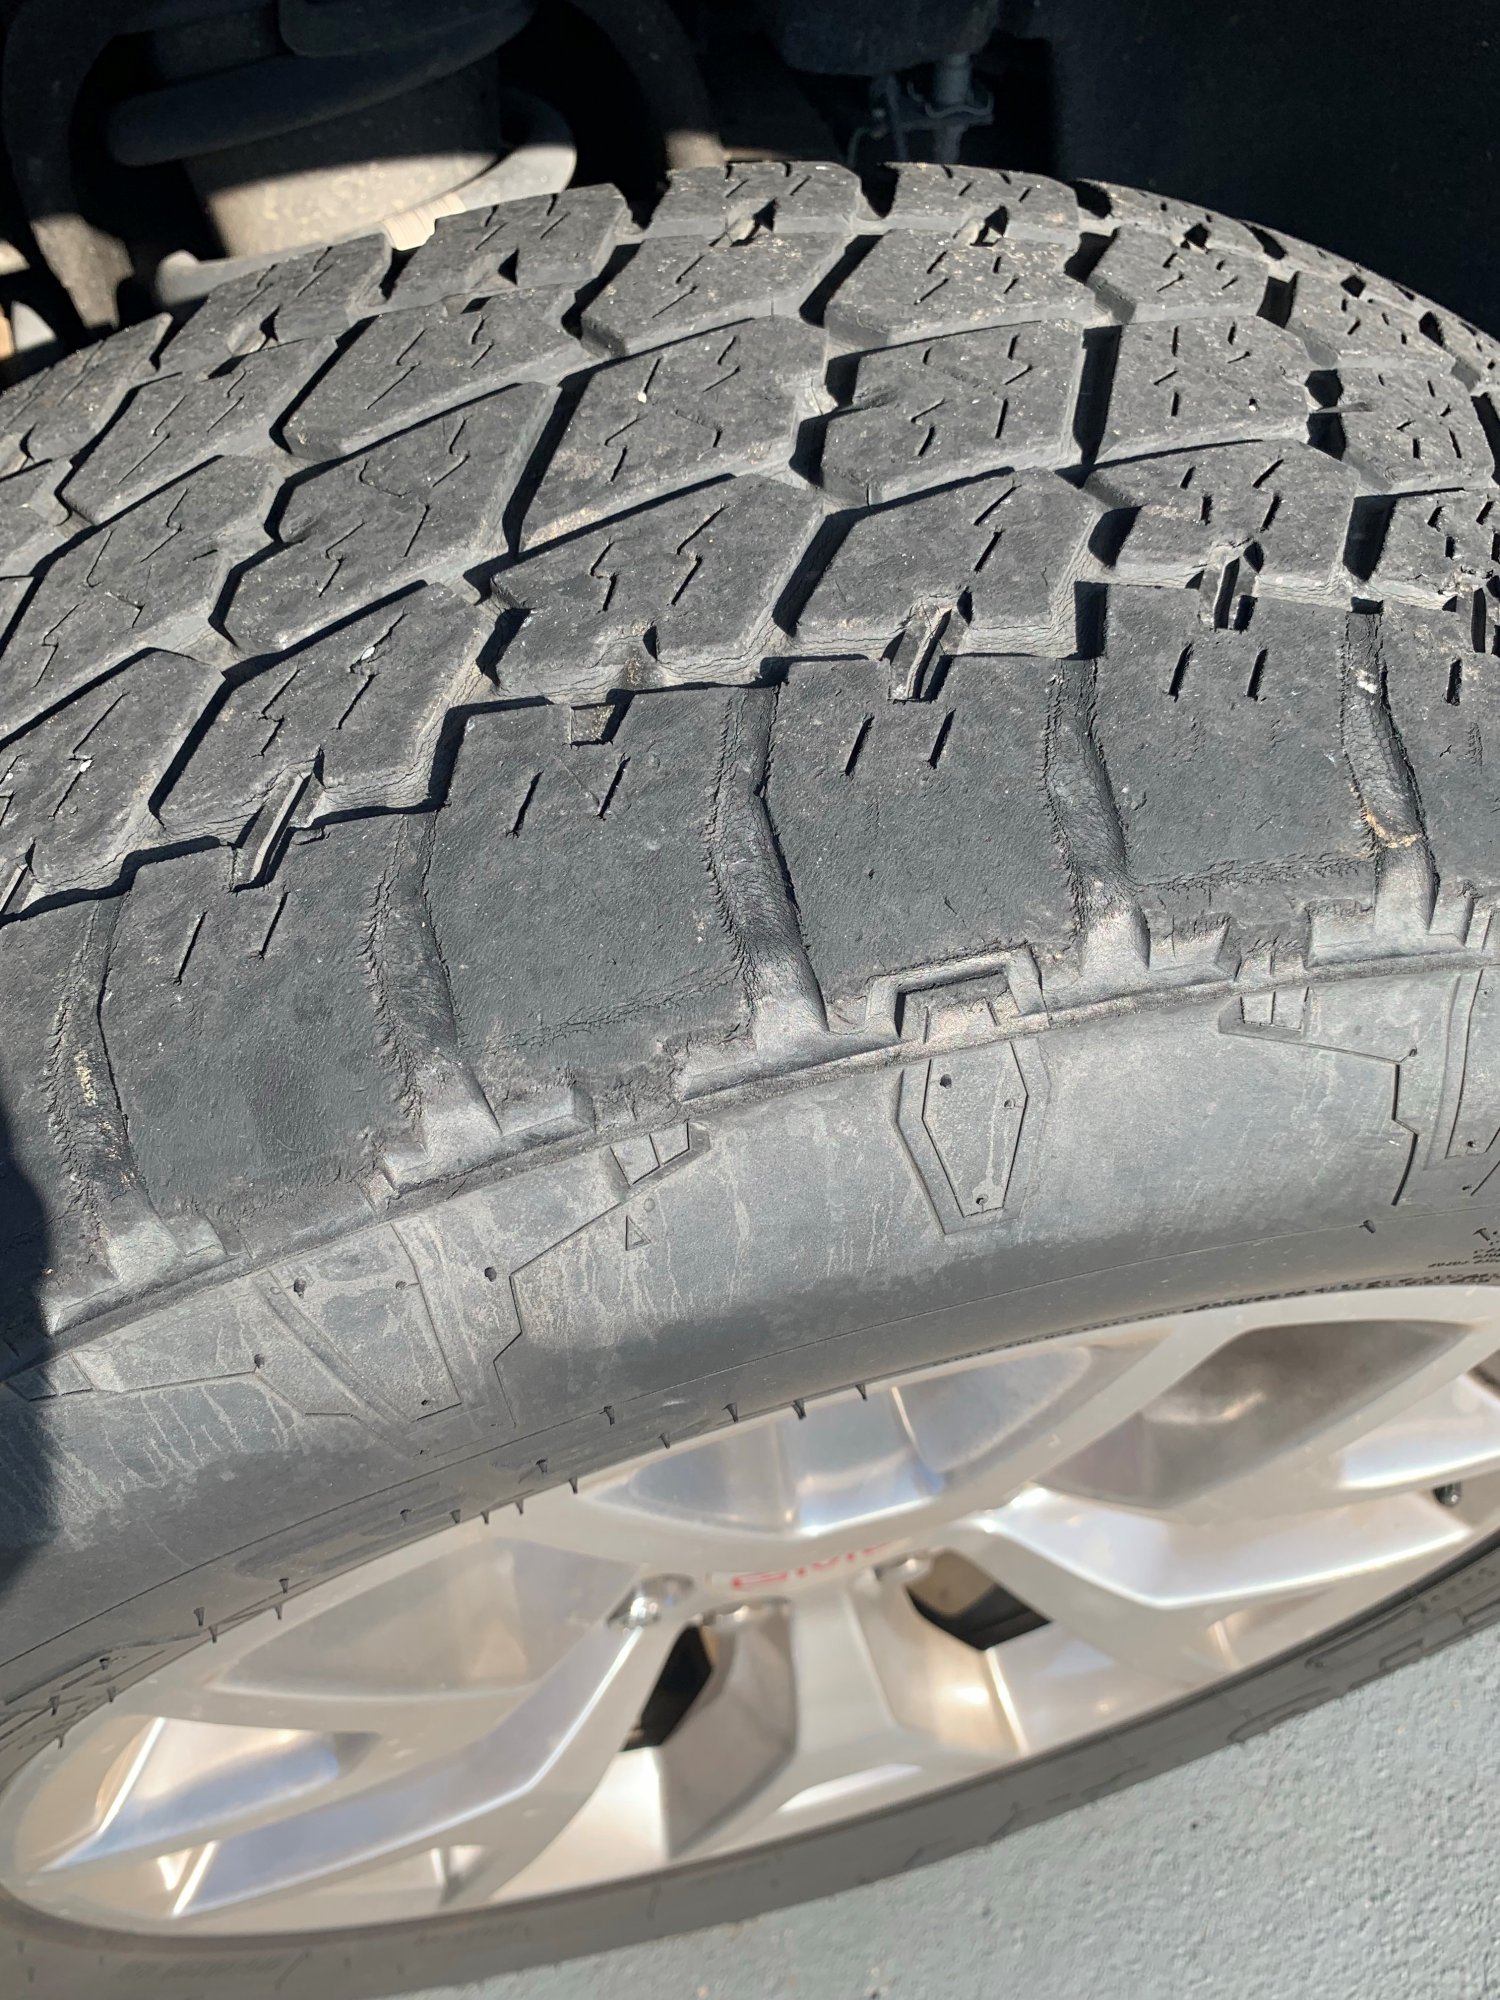 Inner tire wear causes 